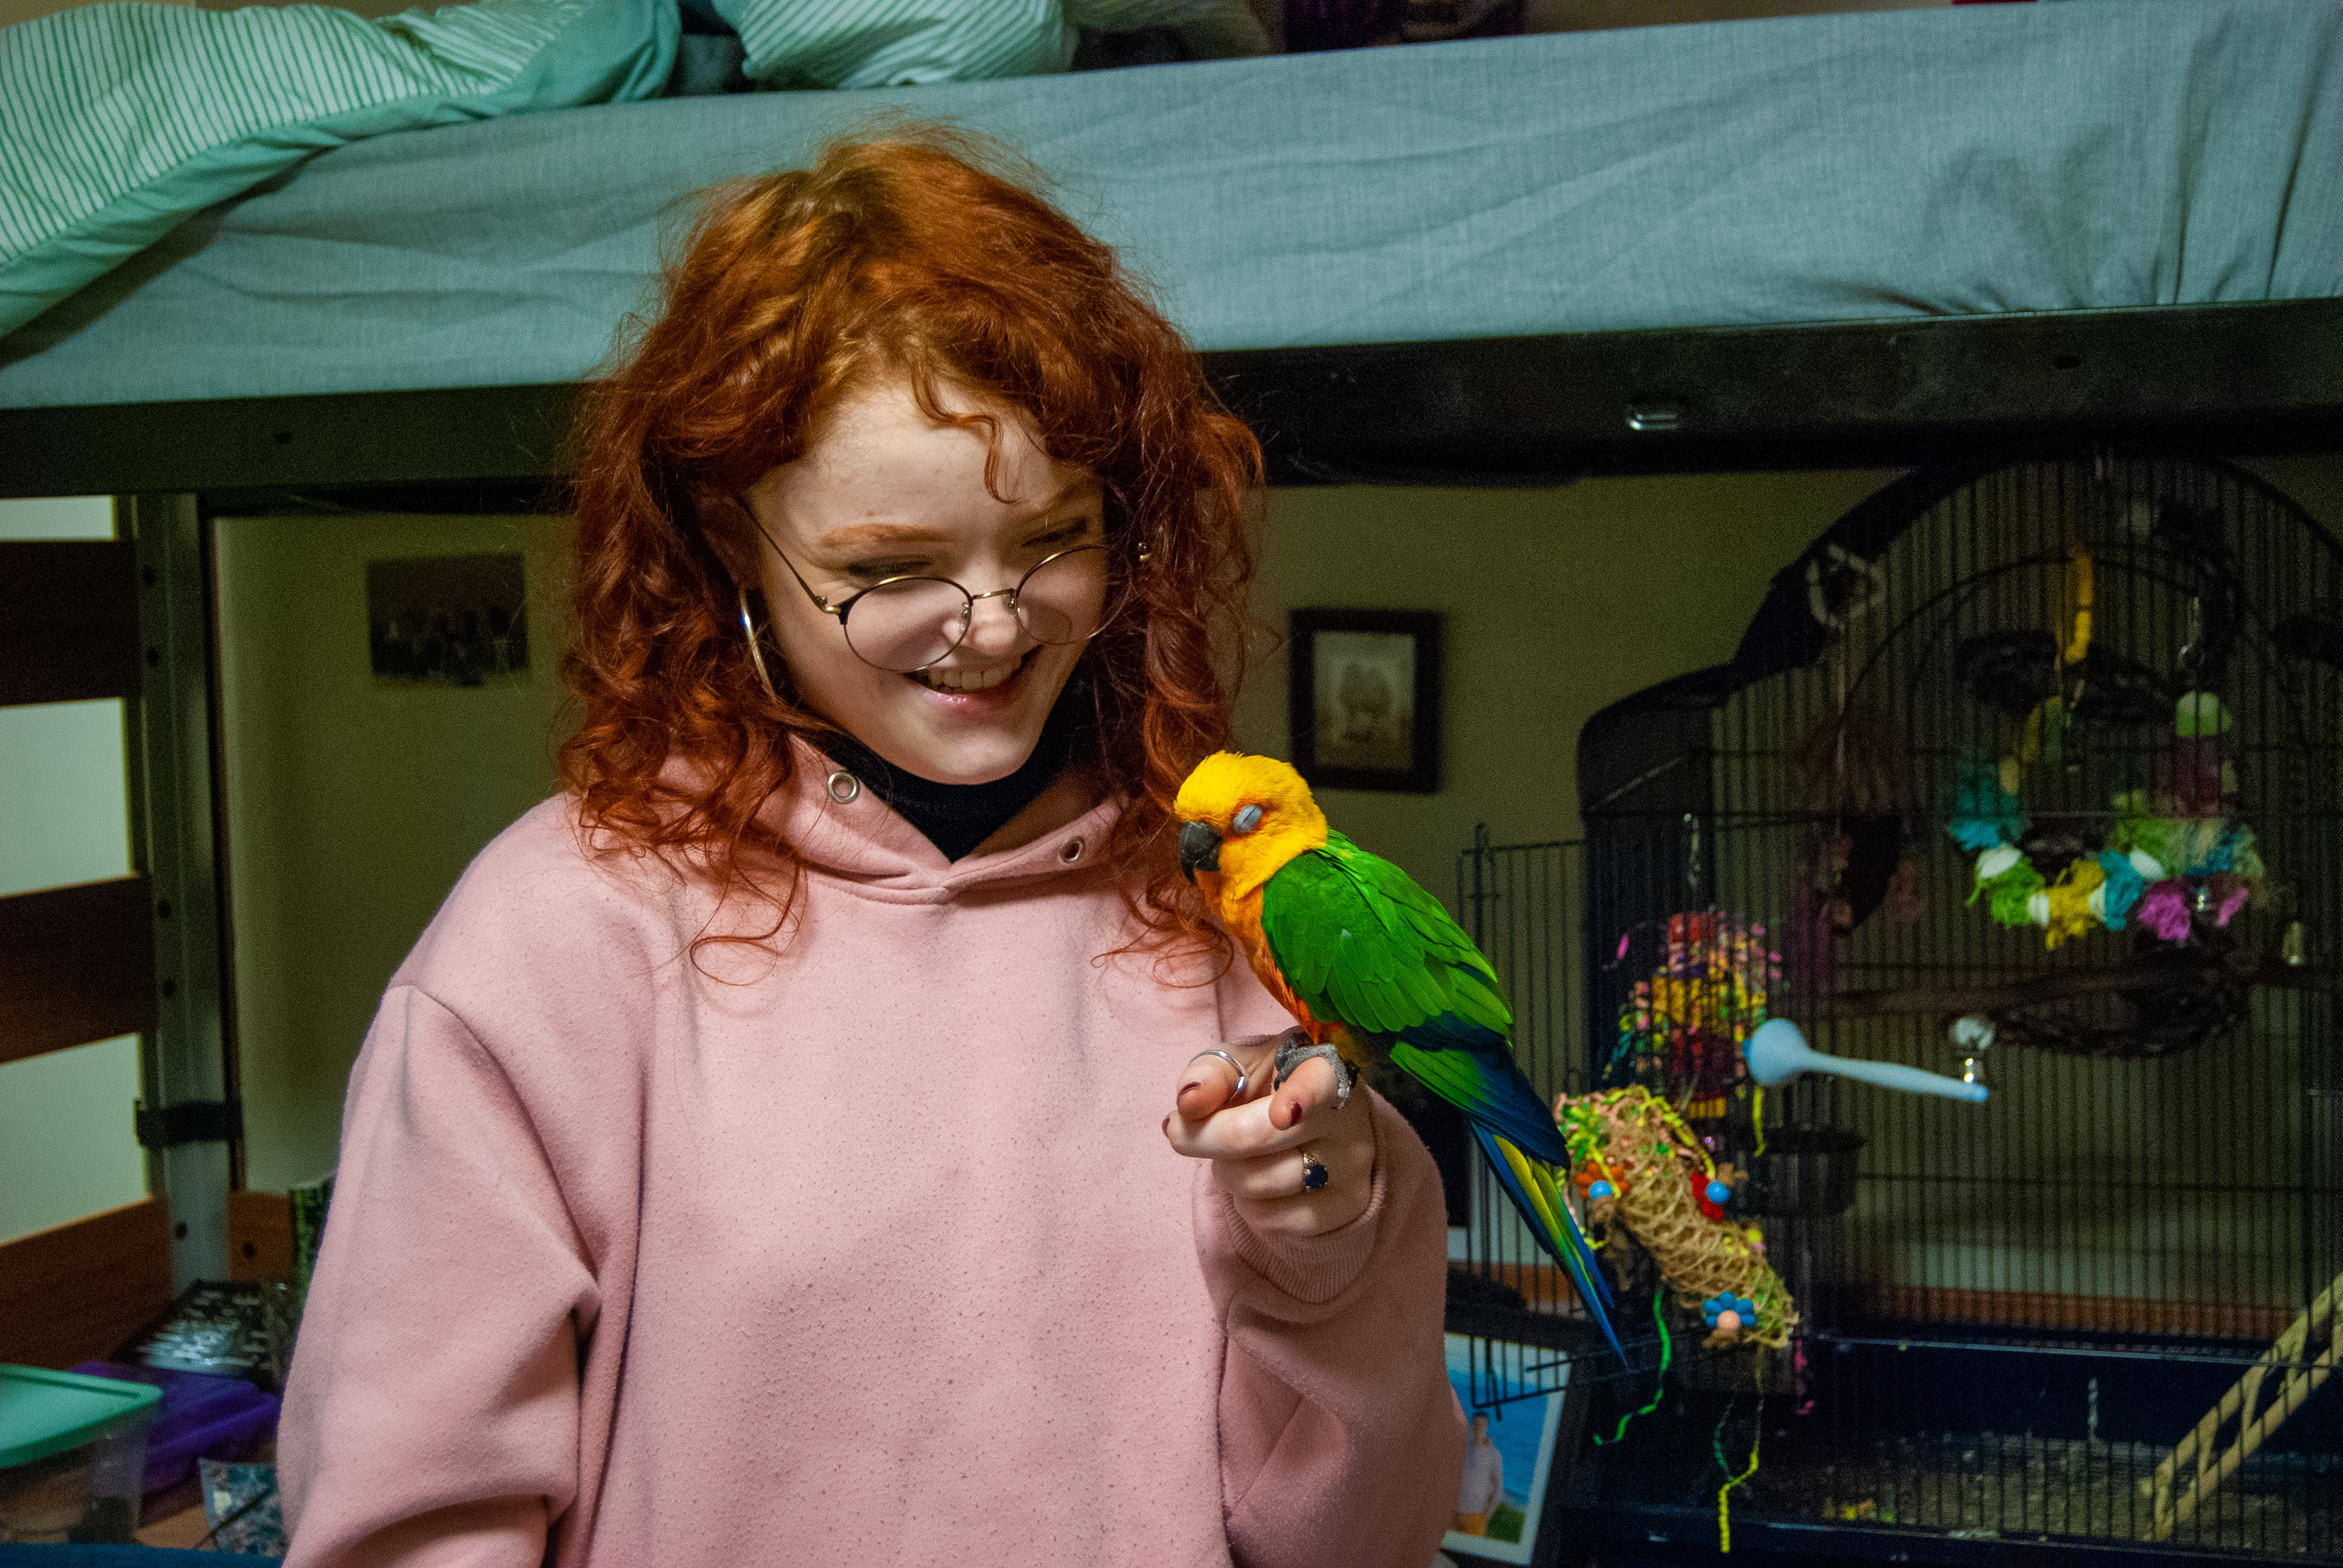 India holds Ollie on her finger and smiles at him. Ollie's cage and toys are in the background.